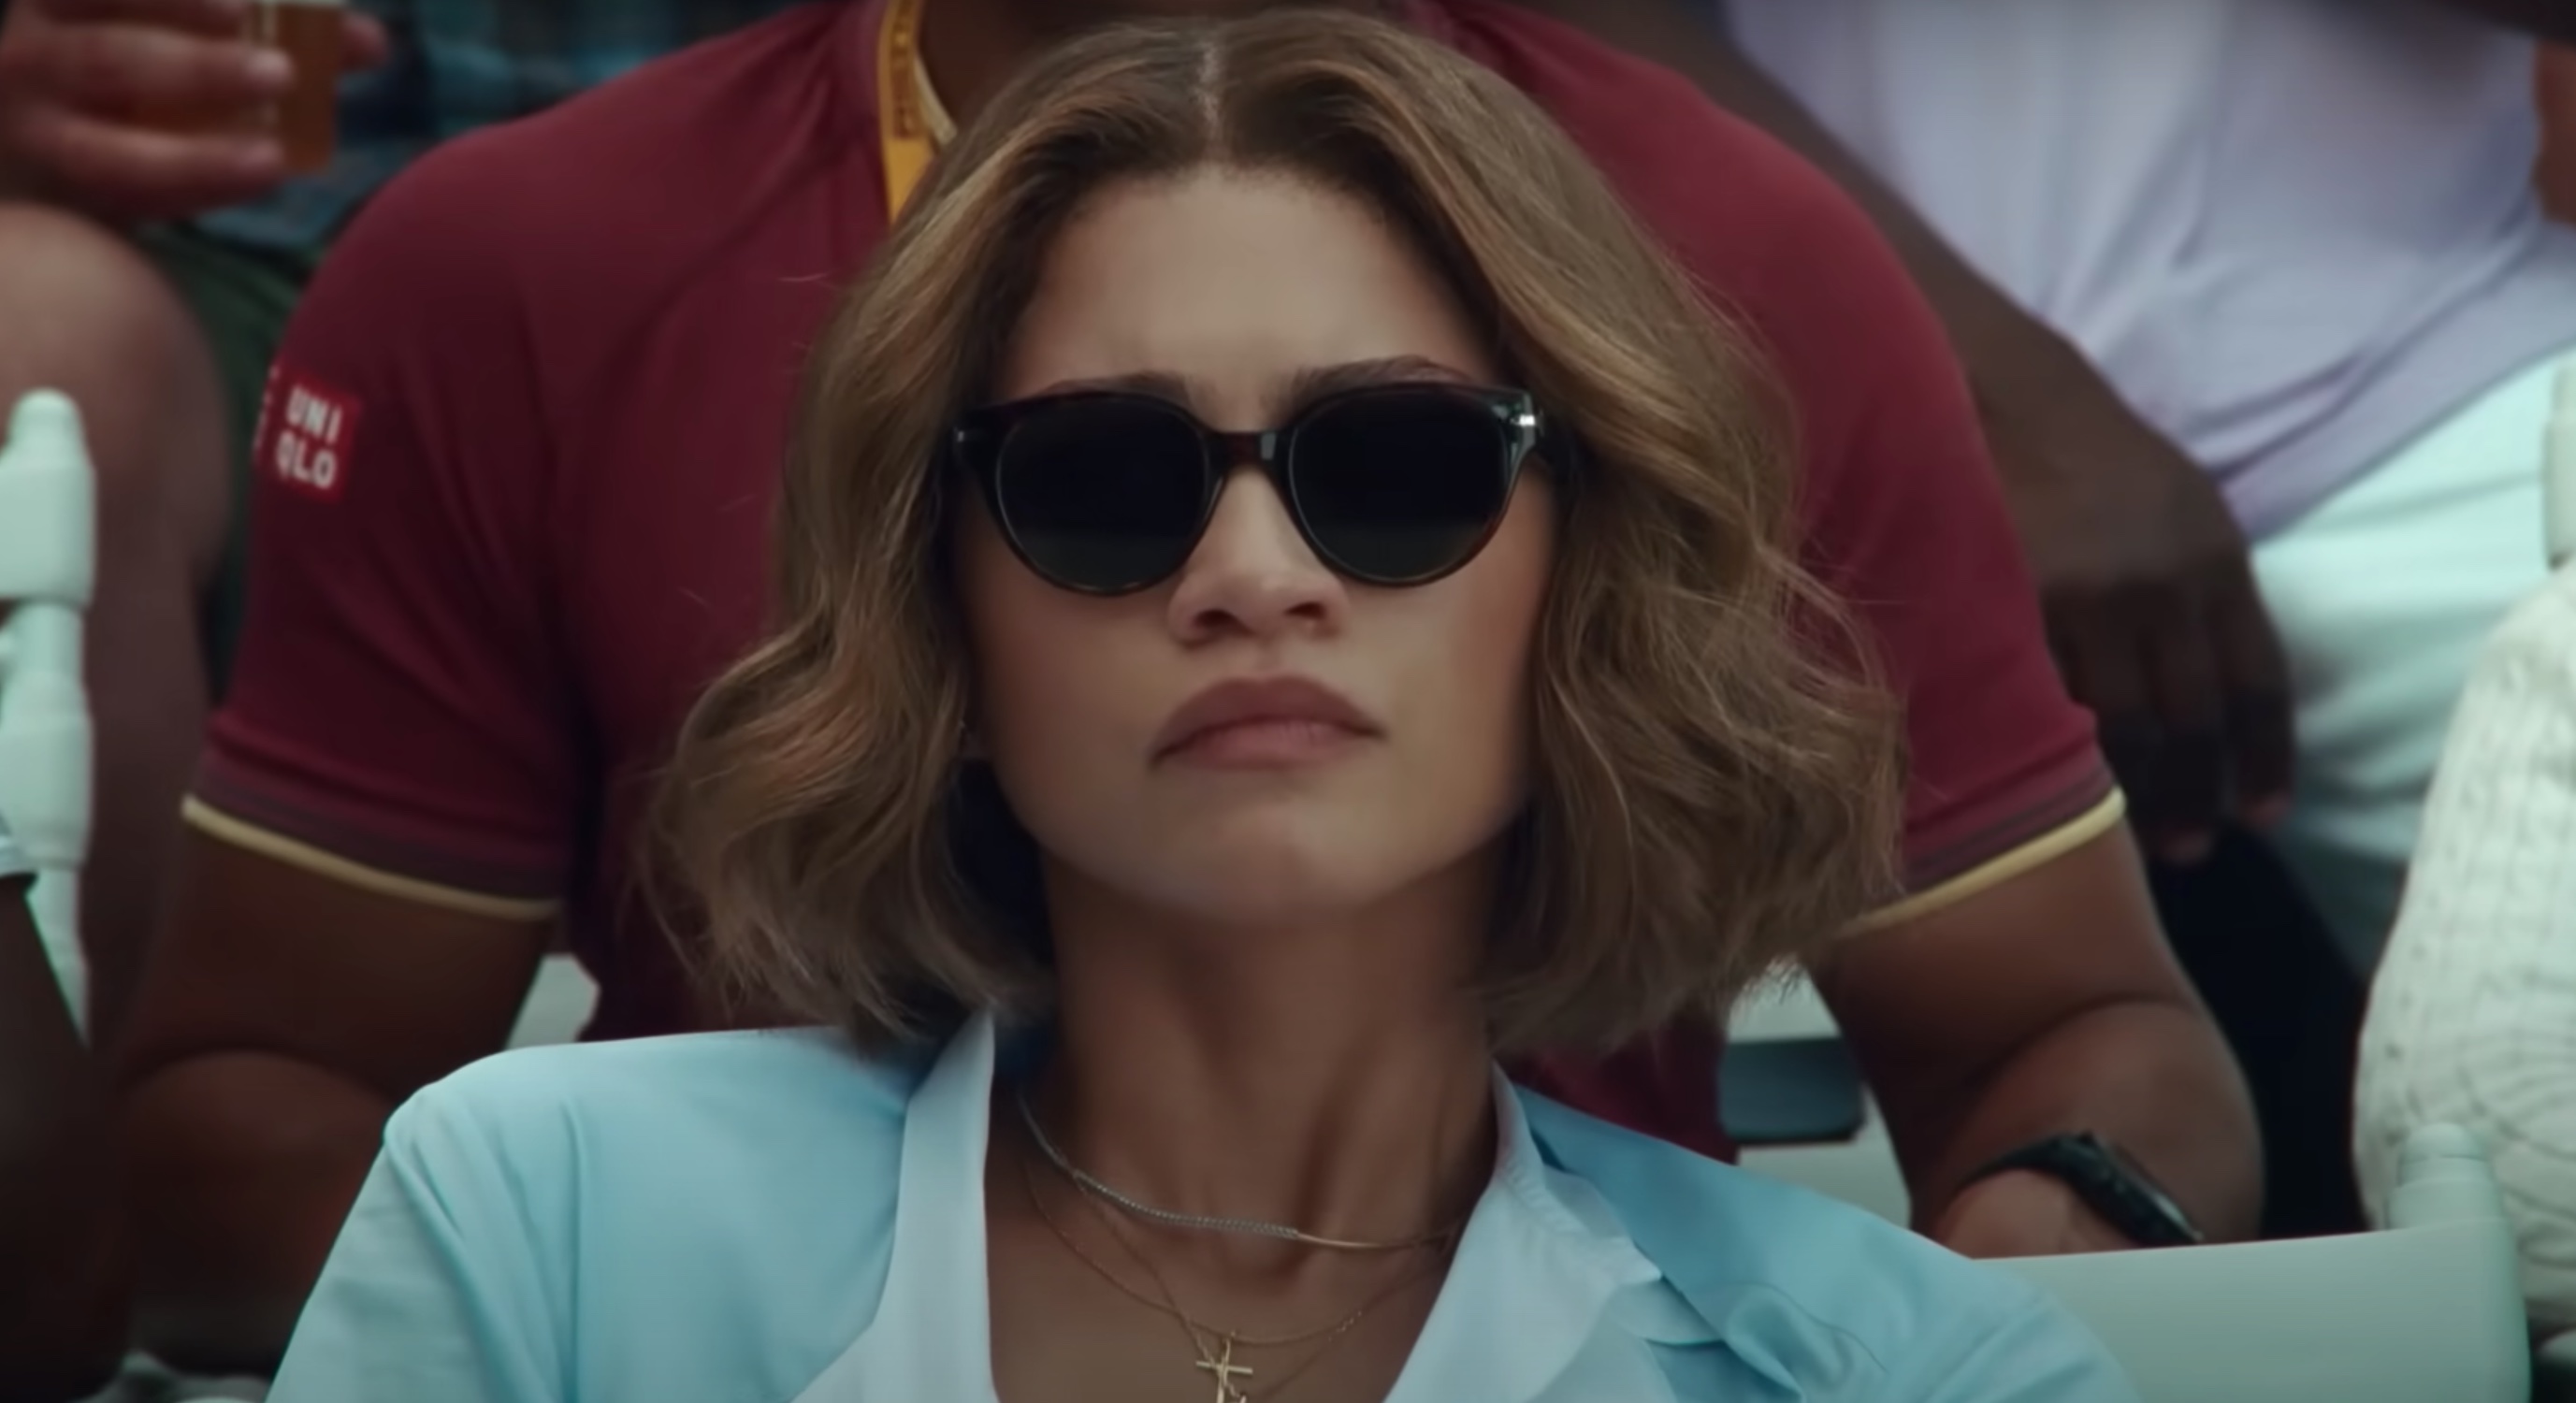 Zendaya ‘The Challengers’: Is Movie Based on a True Story? | Life & Style